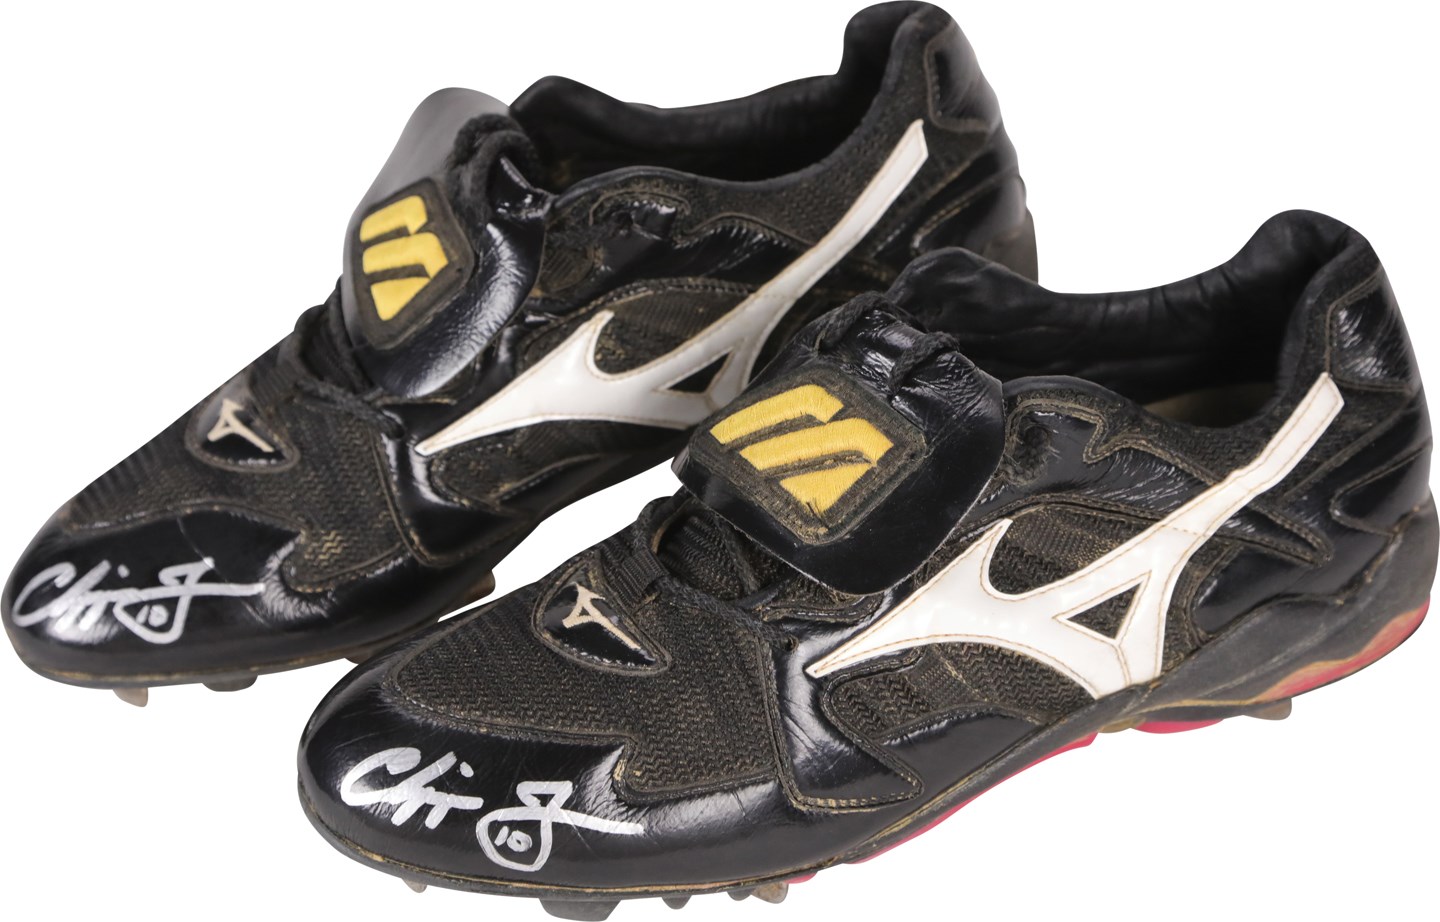 - 2001 Chipper Jones Signed Game Worn Mizuno Cleats Attributed to his 200th Home Run (Provenance)